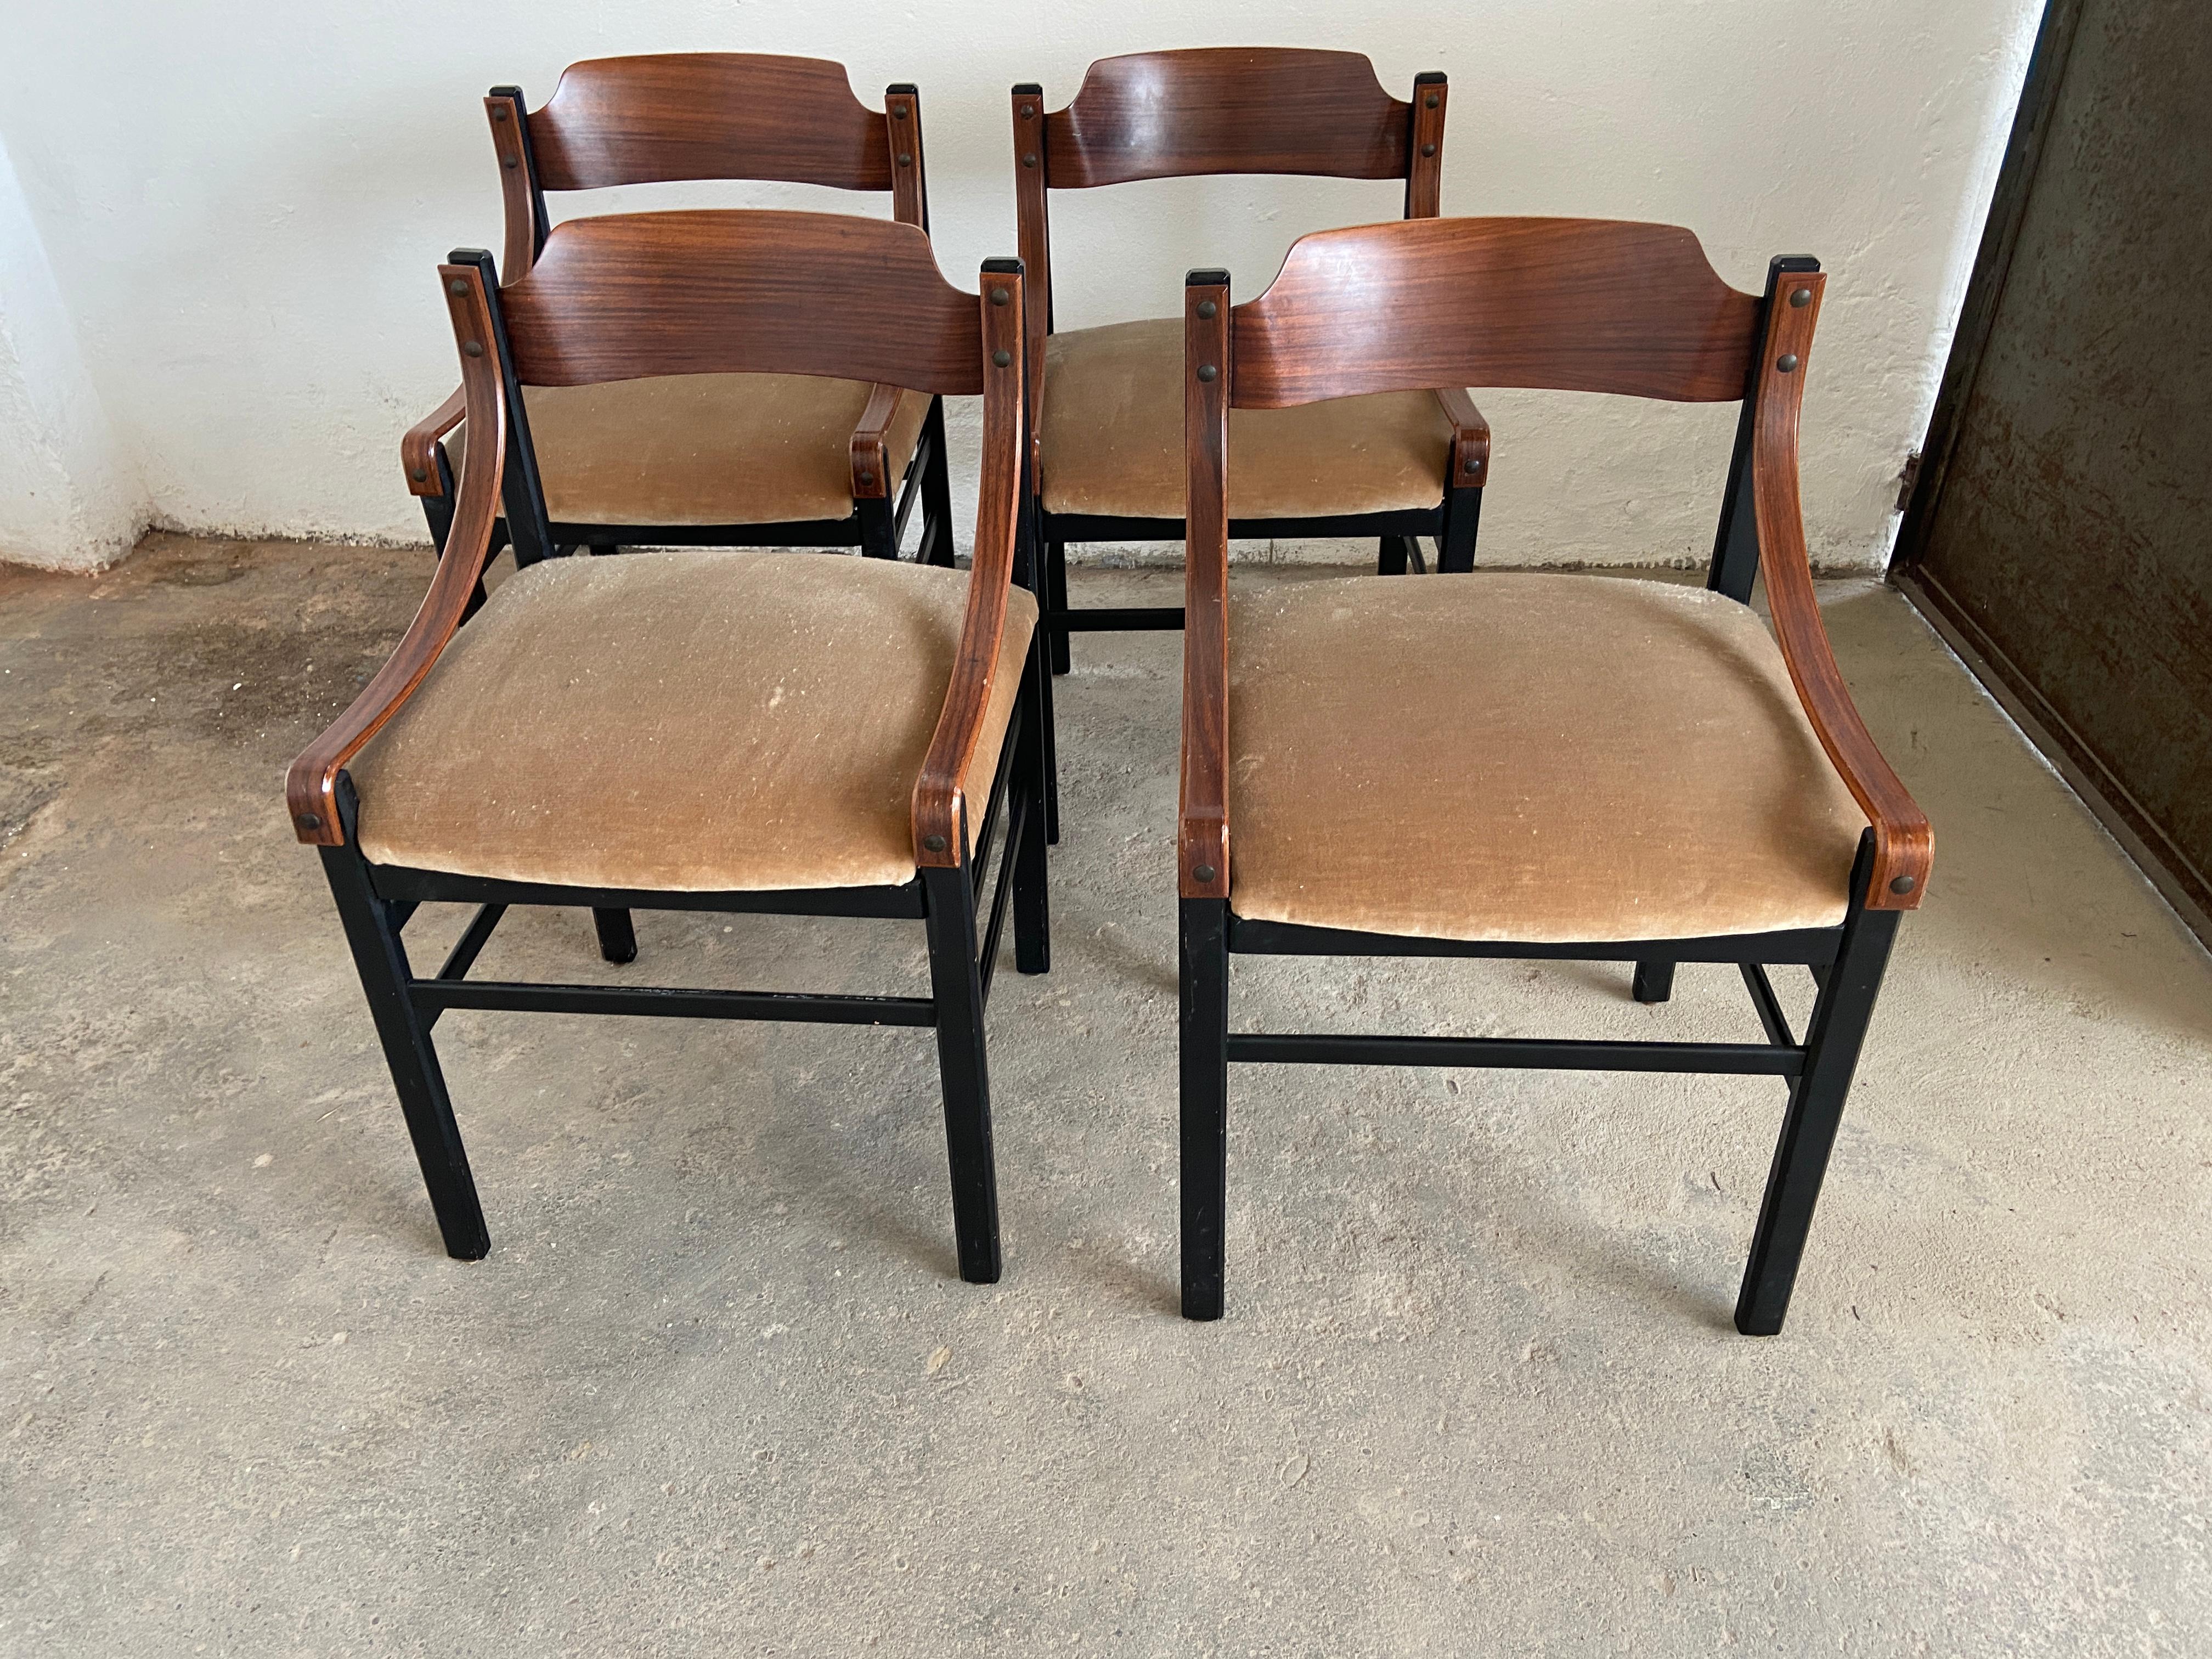 Mid-20th Century Mid-Century Modern Set of Four Danish Dining Room Mahogany Chairs, 1960s For Sale